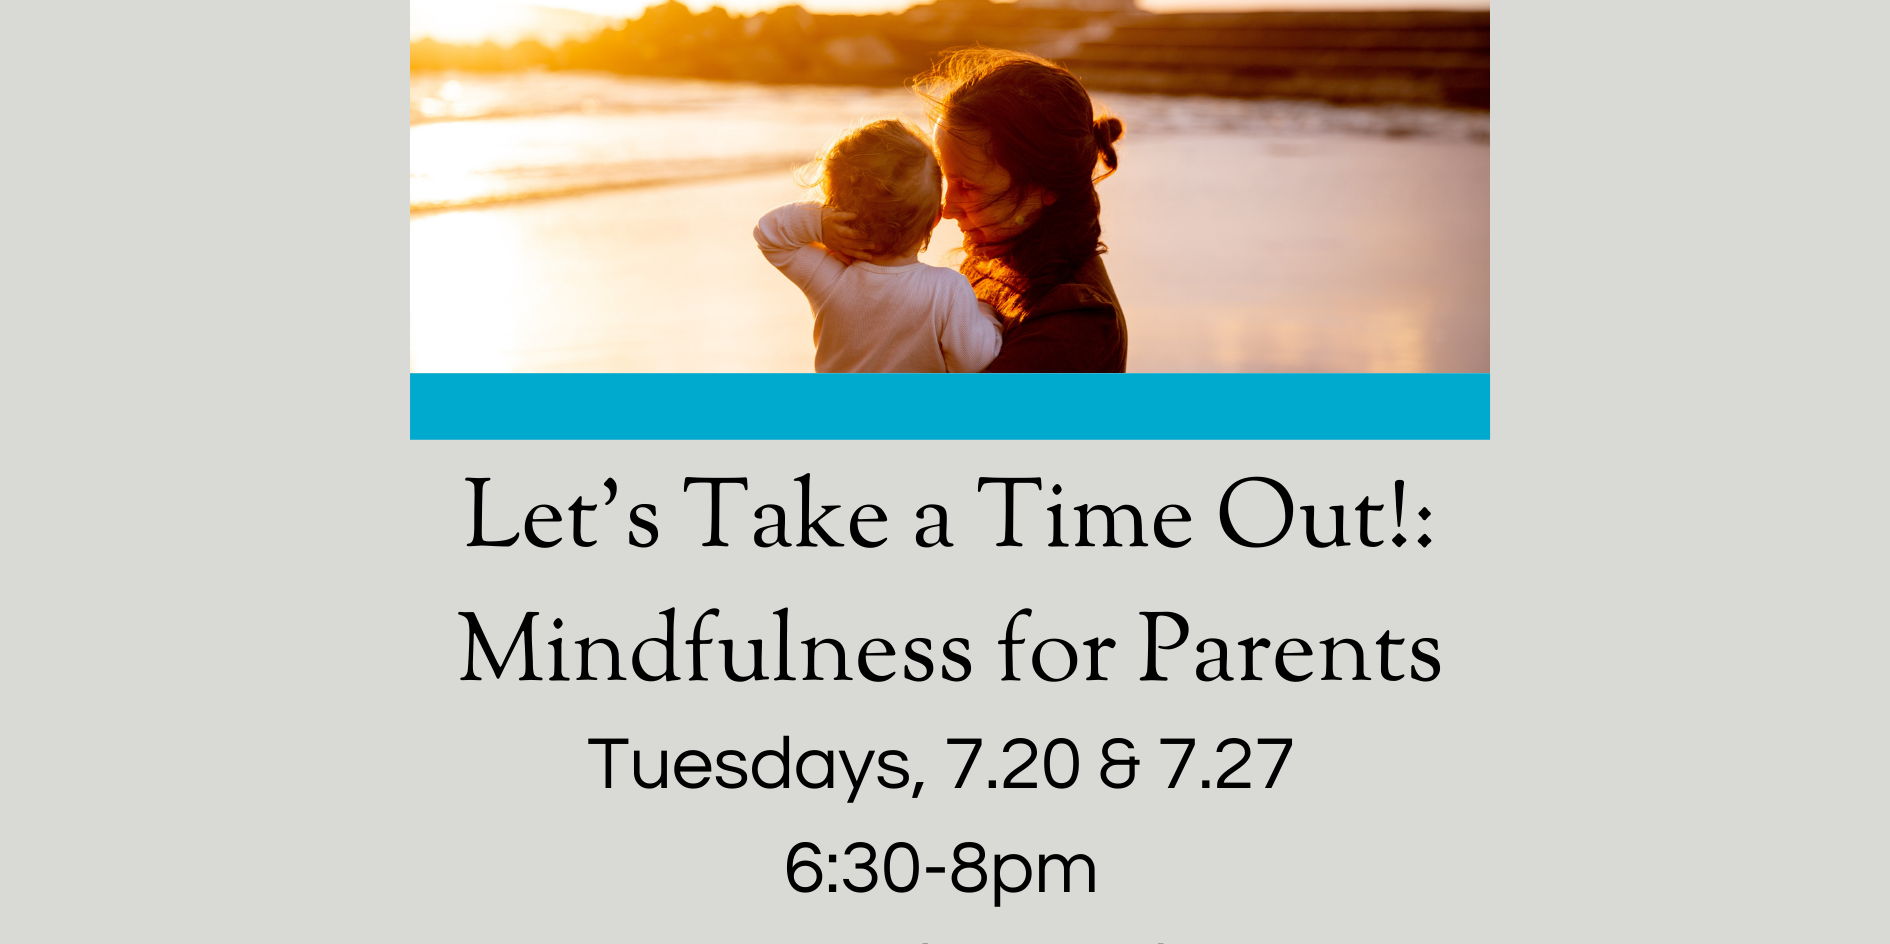 Let’s Take a Time Out! (Mindfulness for Parents) promotional image